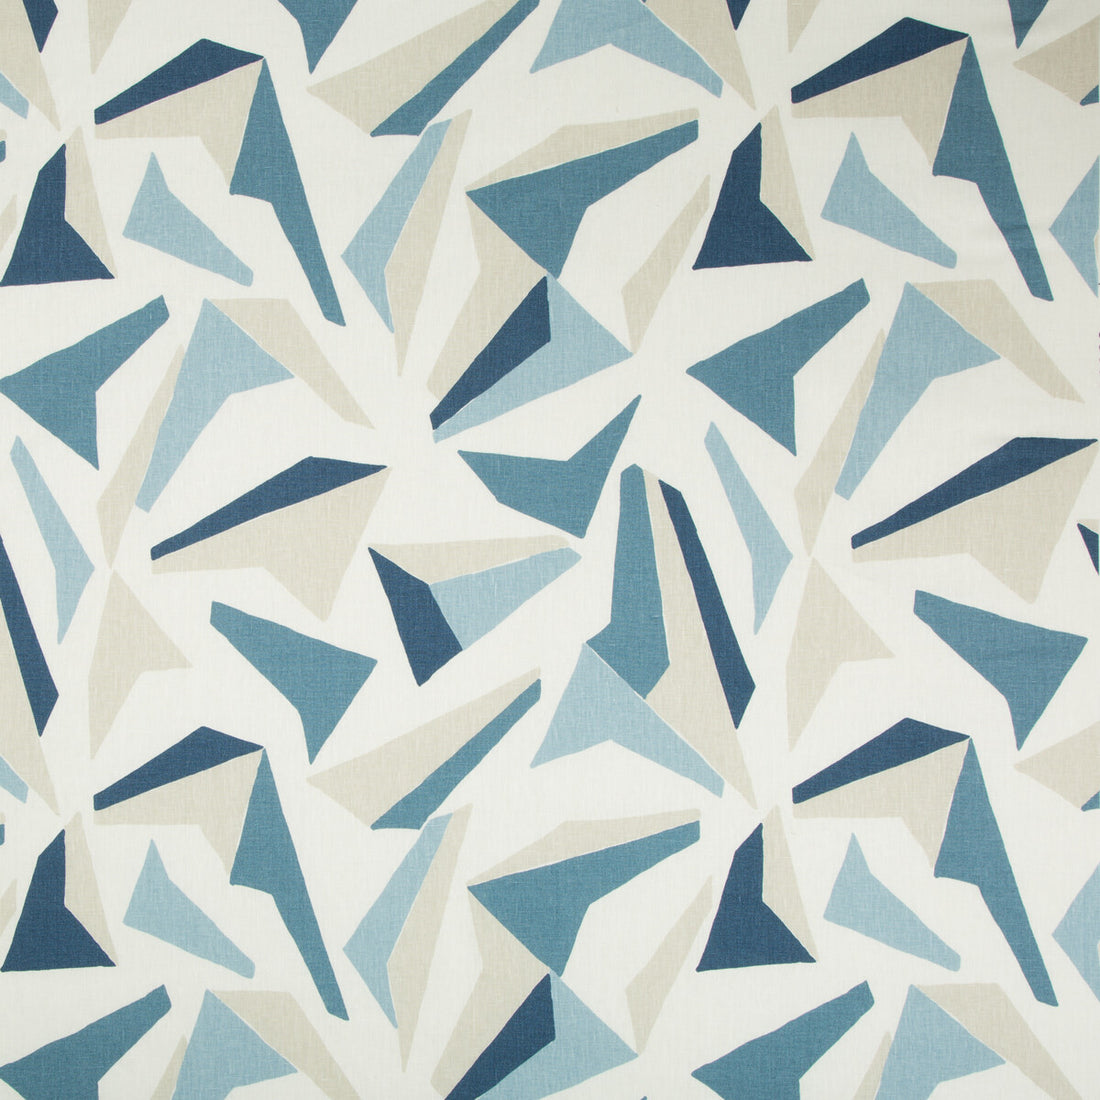 Flock fabric in river color - pattern FLOCK.516.0 - by Kravet Basics in the Thom Filicia Altitude collection